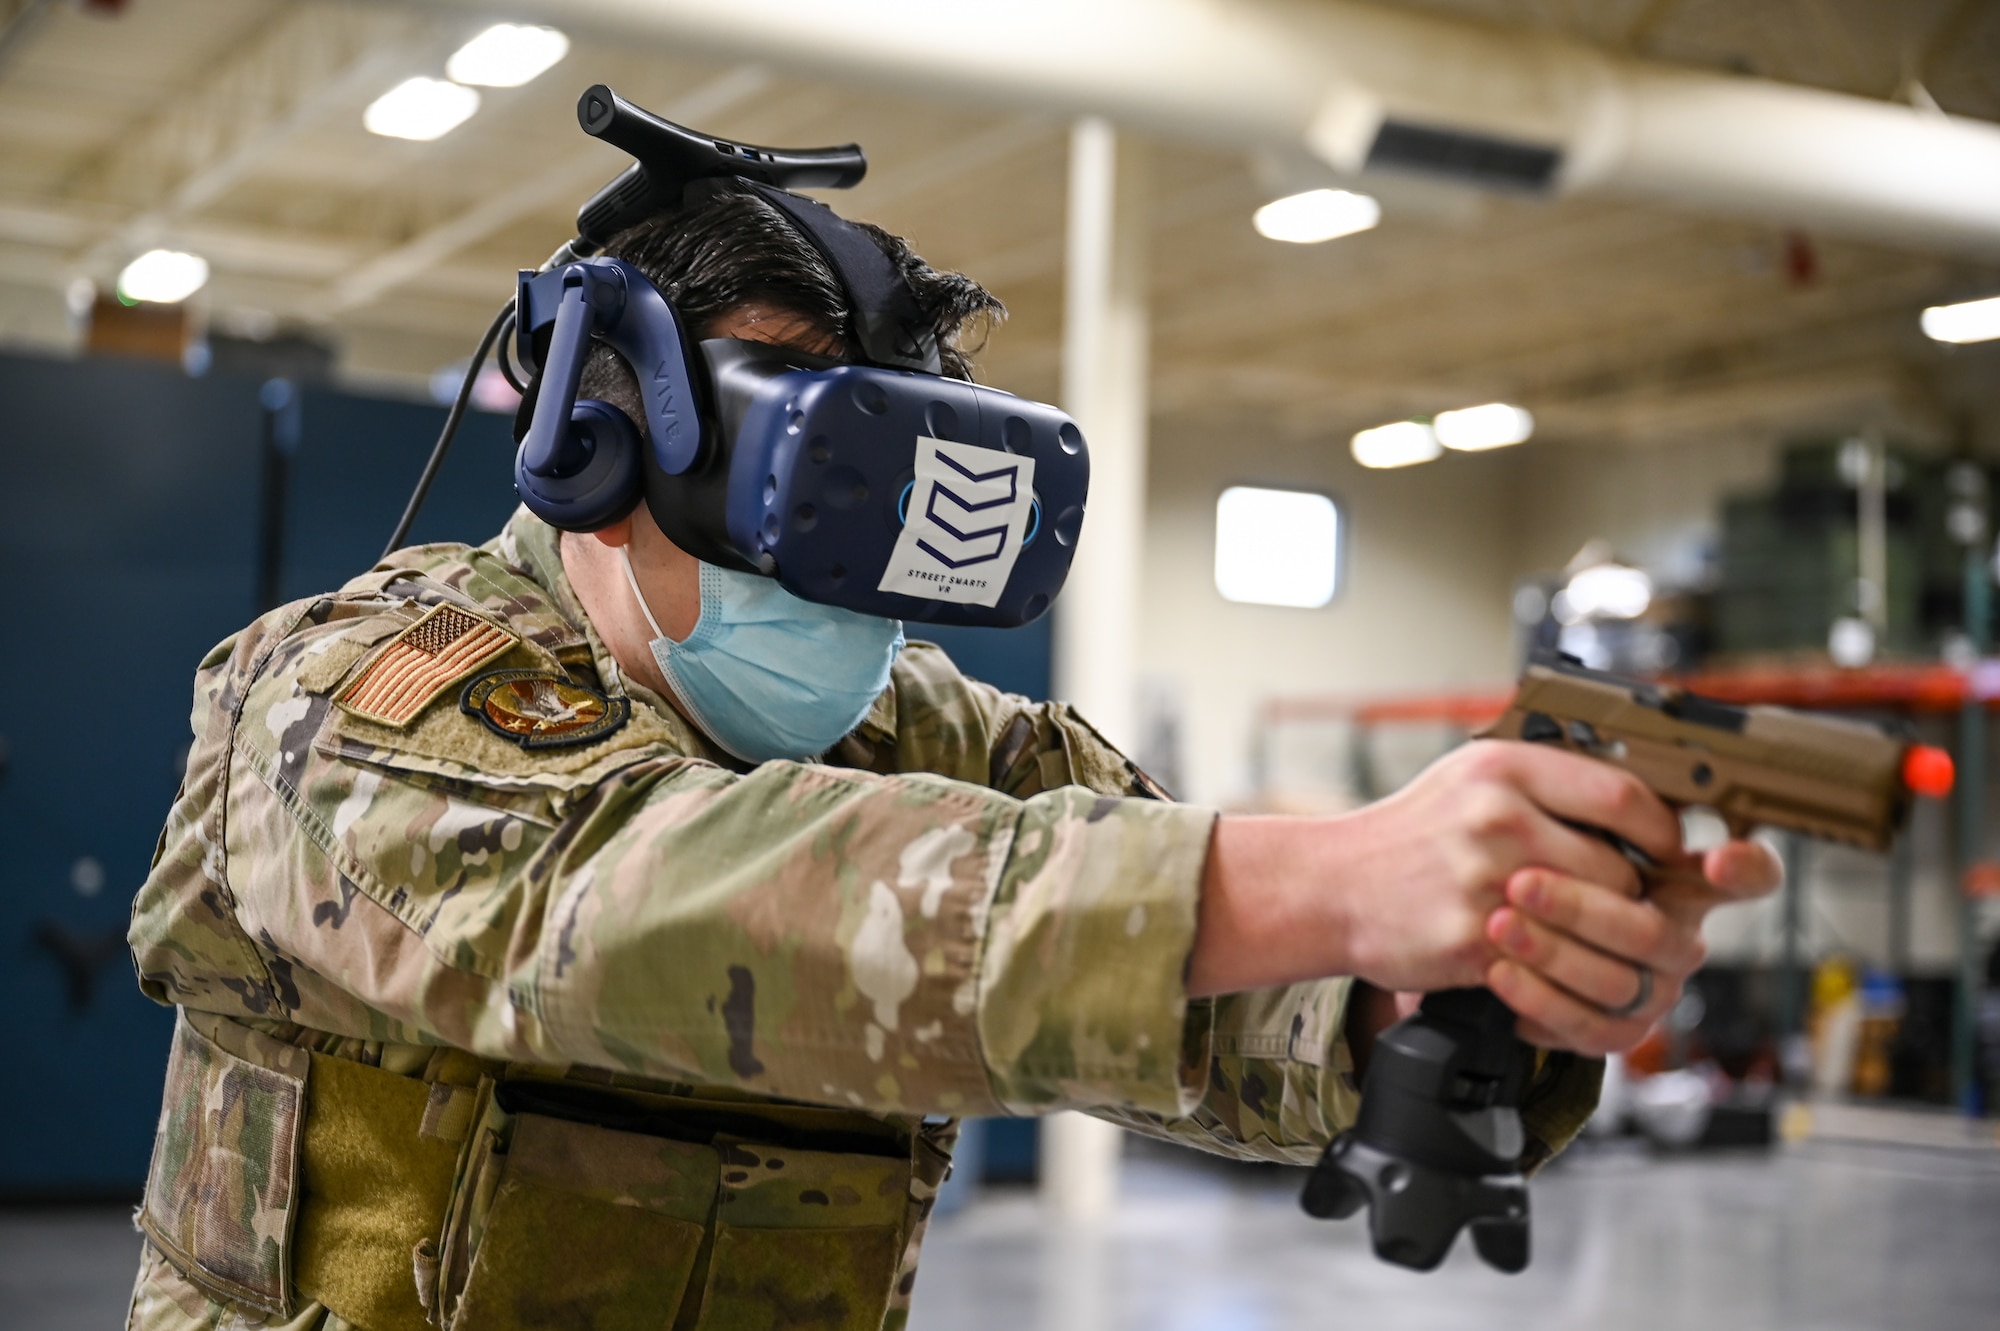 Staff Sgt. Brandon Wilson, 75th Security Forces Squadron, during a use-of-force response scenario with the Street Smarts Virtual Reality system. The squadron recently implemented virtual reality to fully immerse themselves into realistic three-dimensional situations to enhance their training. (U.S. Air Force photo by Cynthia Griggs)